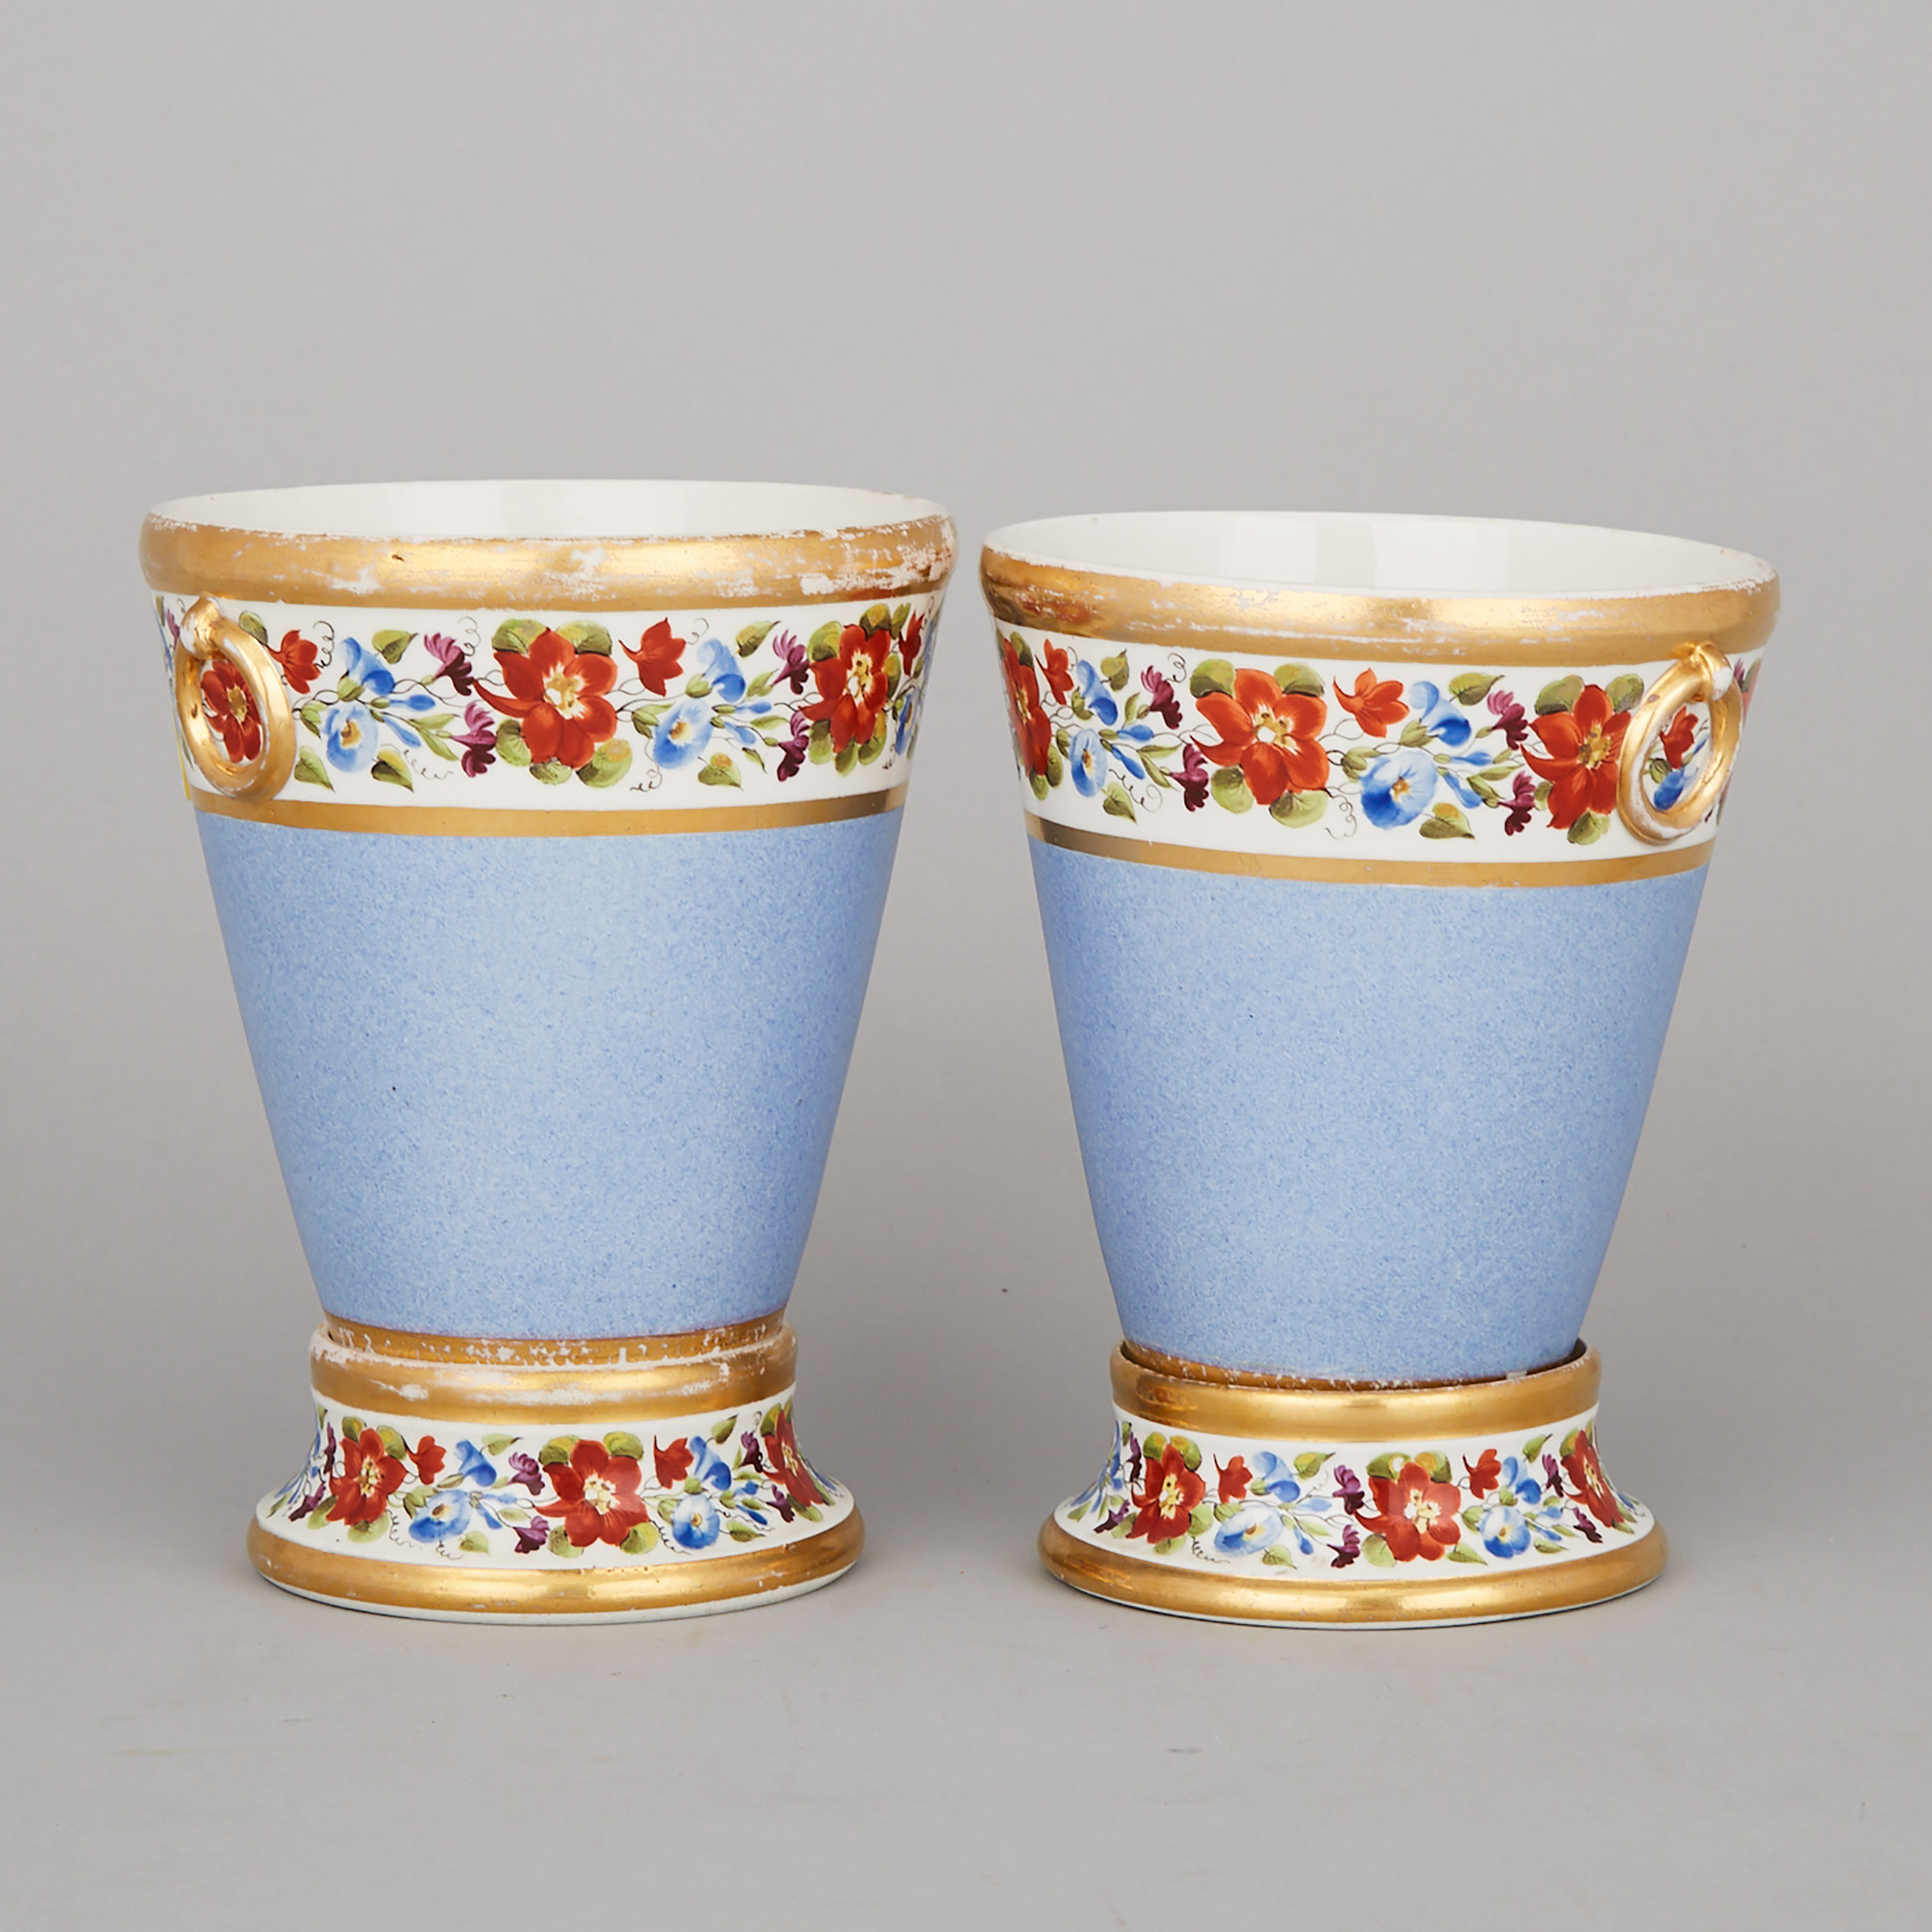 Pair of English Porcelain Cachepots, early 19th century